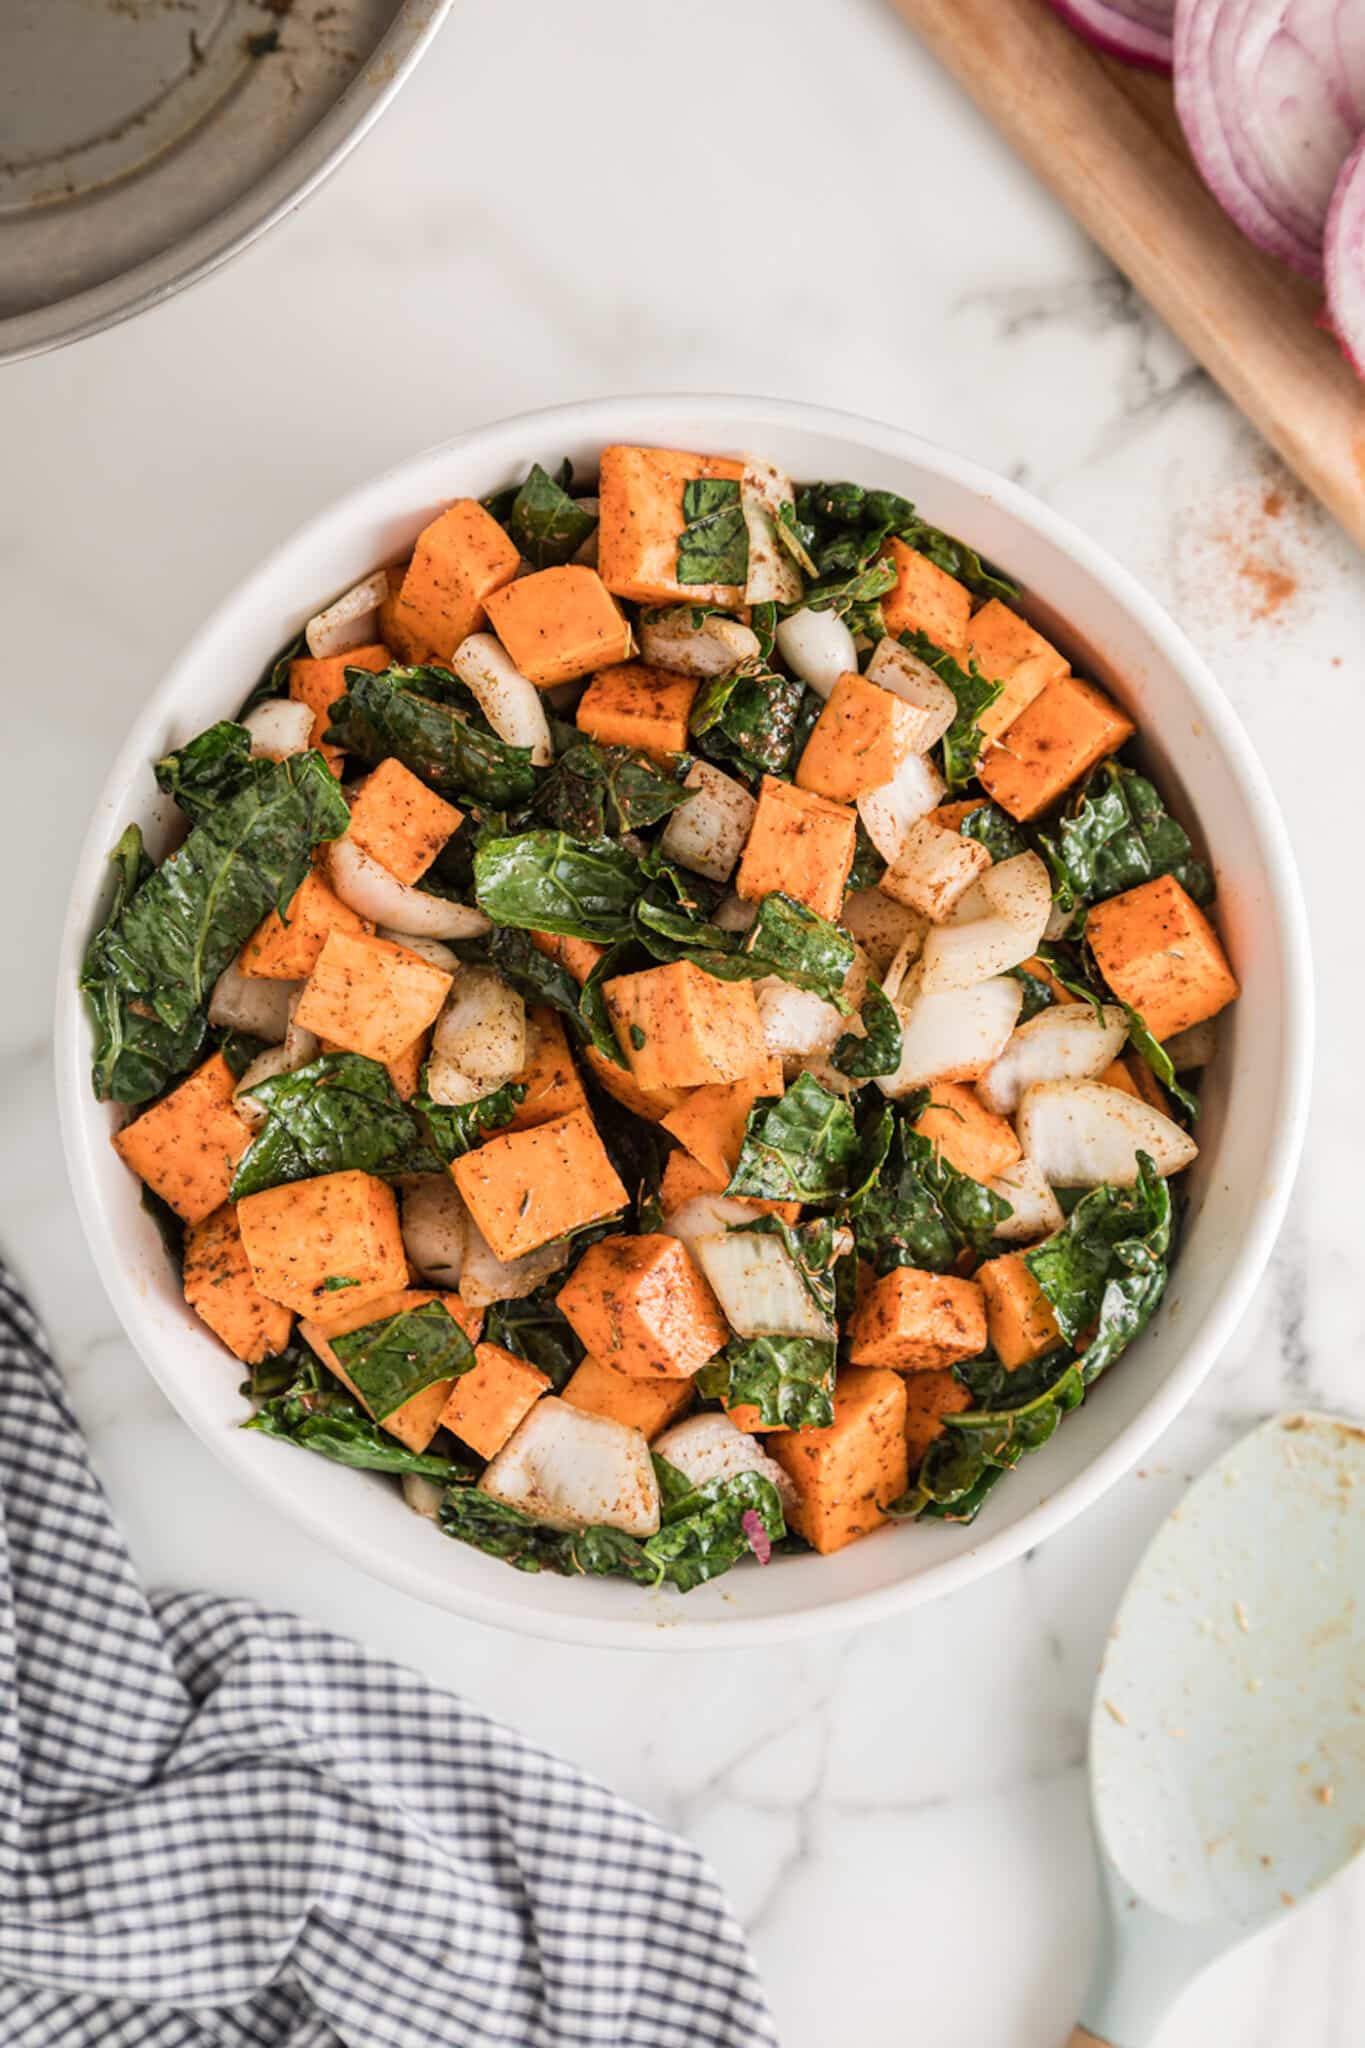 Large white ceramic bowl filled with baked kale and sweet potato.